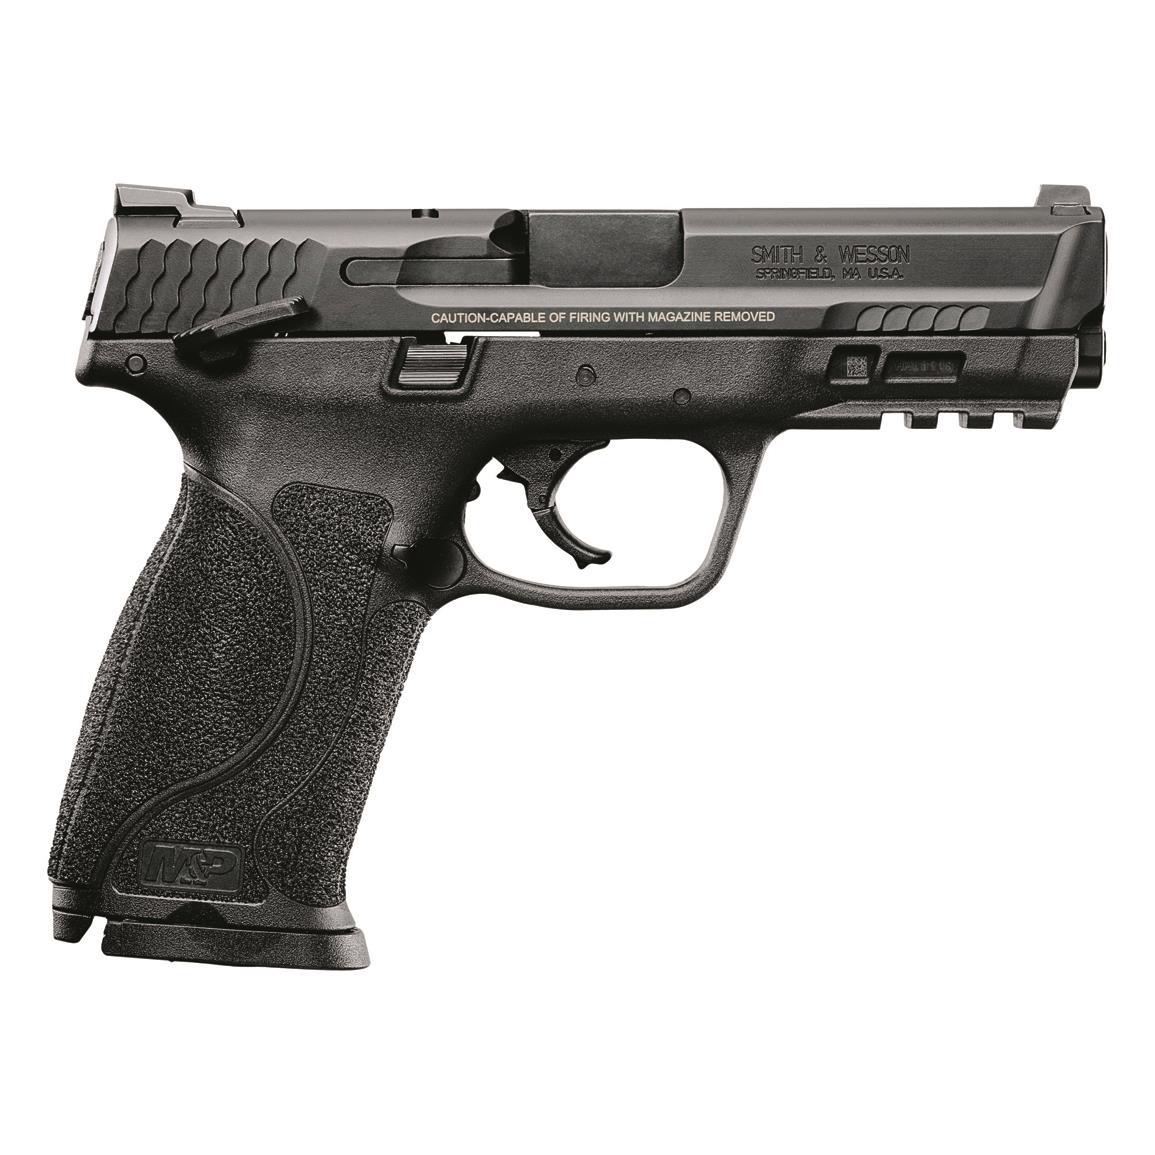 Smith & Wesson M&P40 M2.0, Semi-Automatic, .40 S&W, 4.25" Barrel, Thumb Safety, 15+1 Rounds